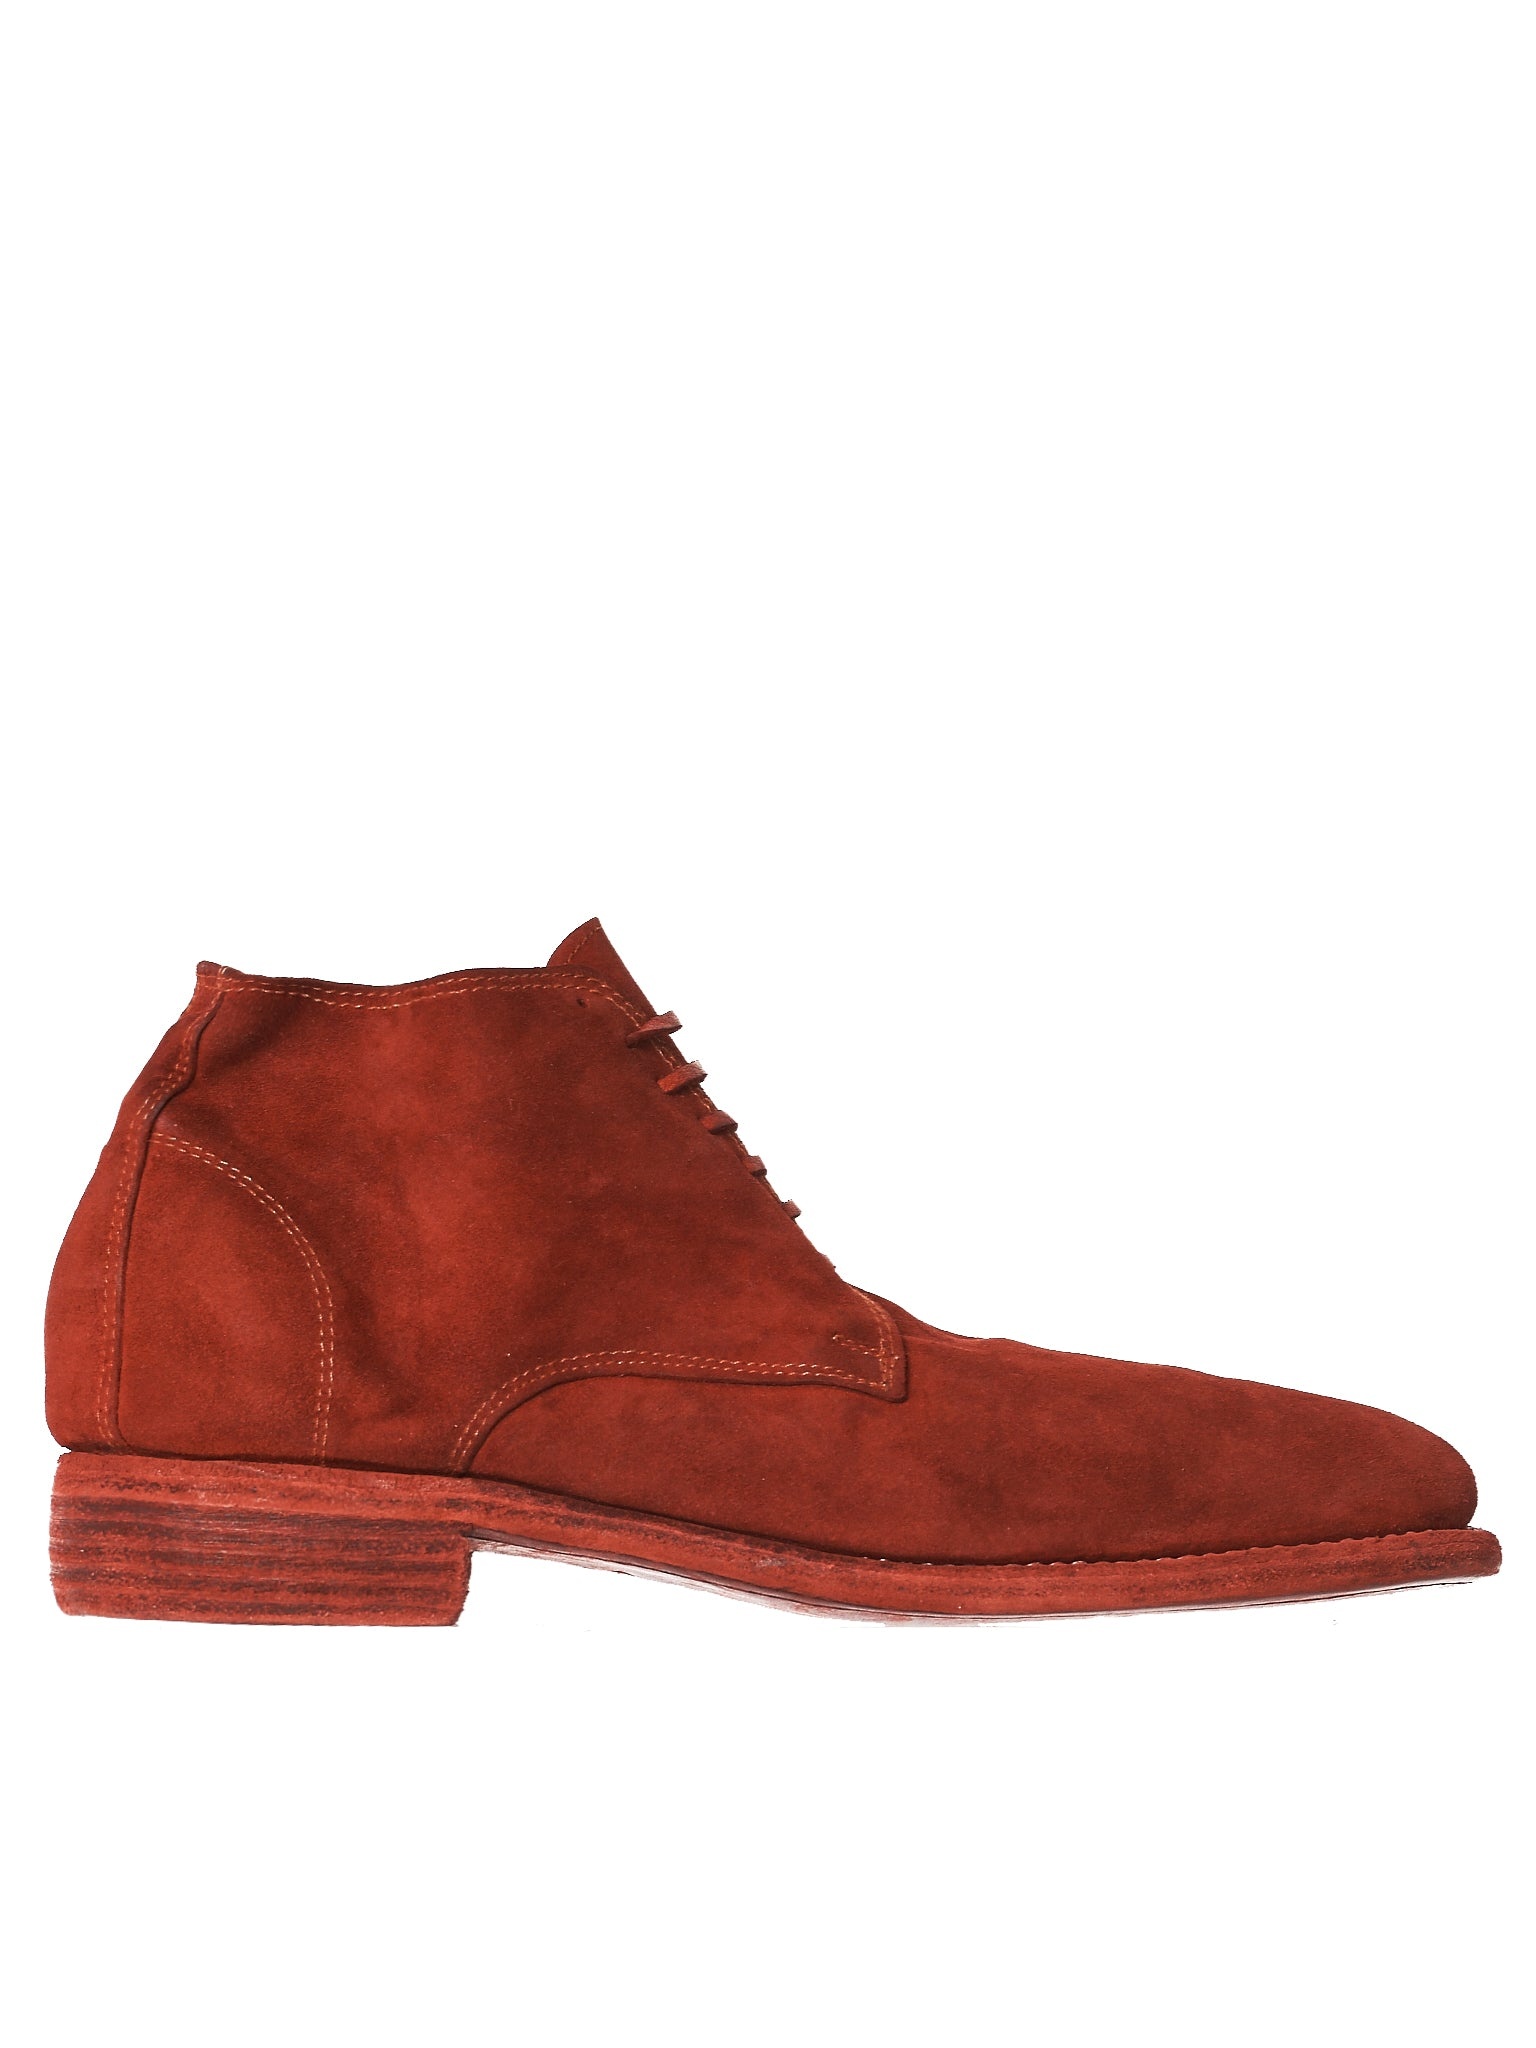 Suede Dyed Leather Boots - 1